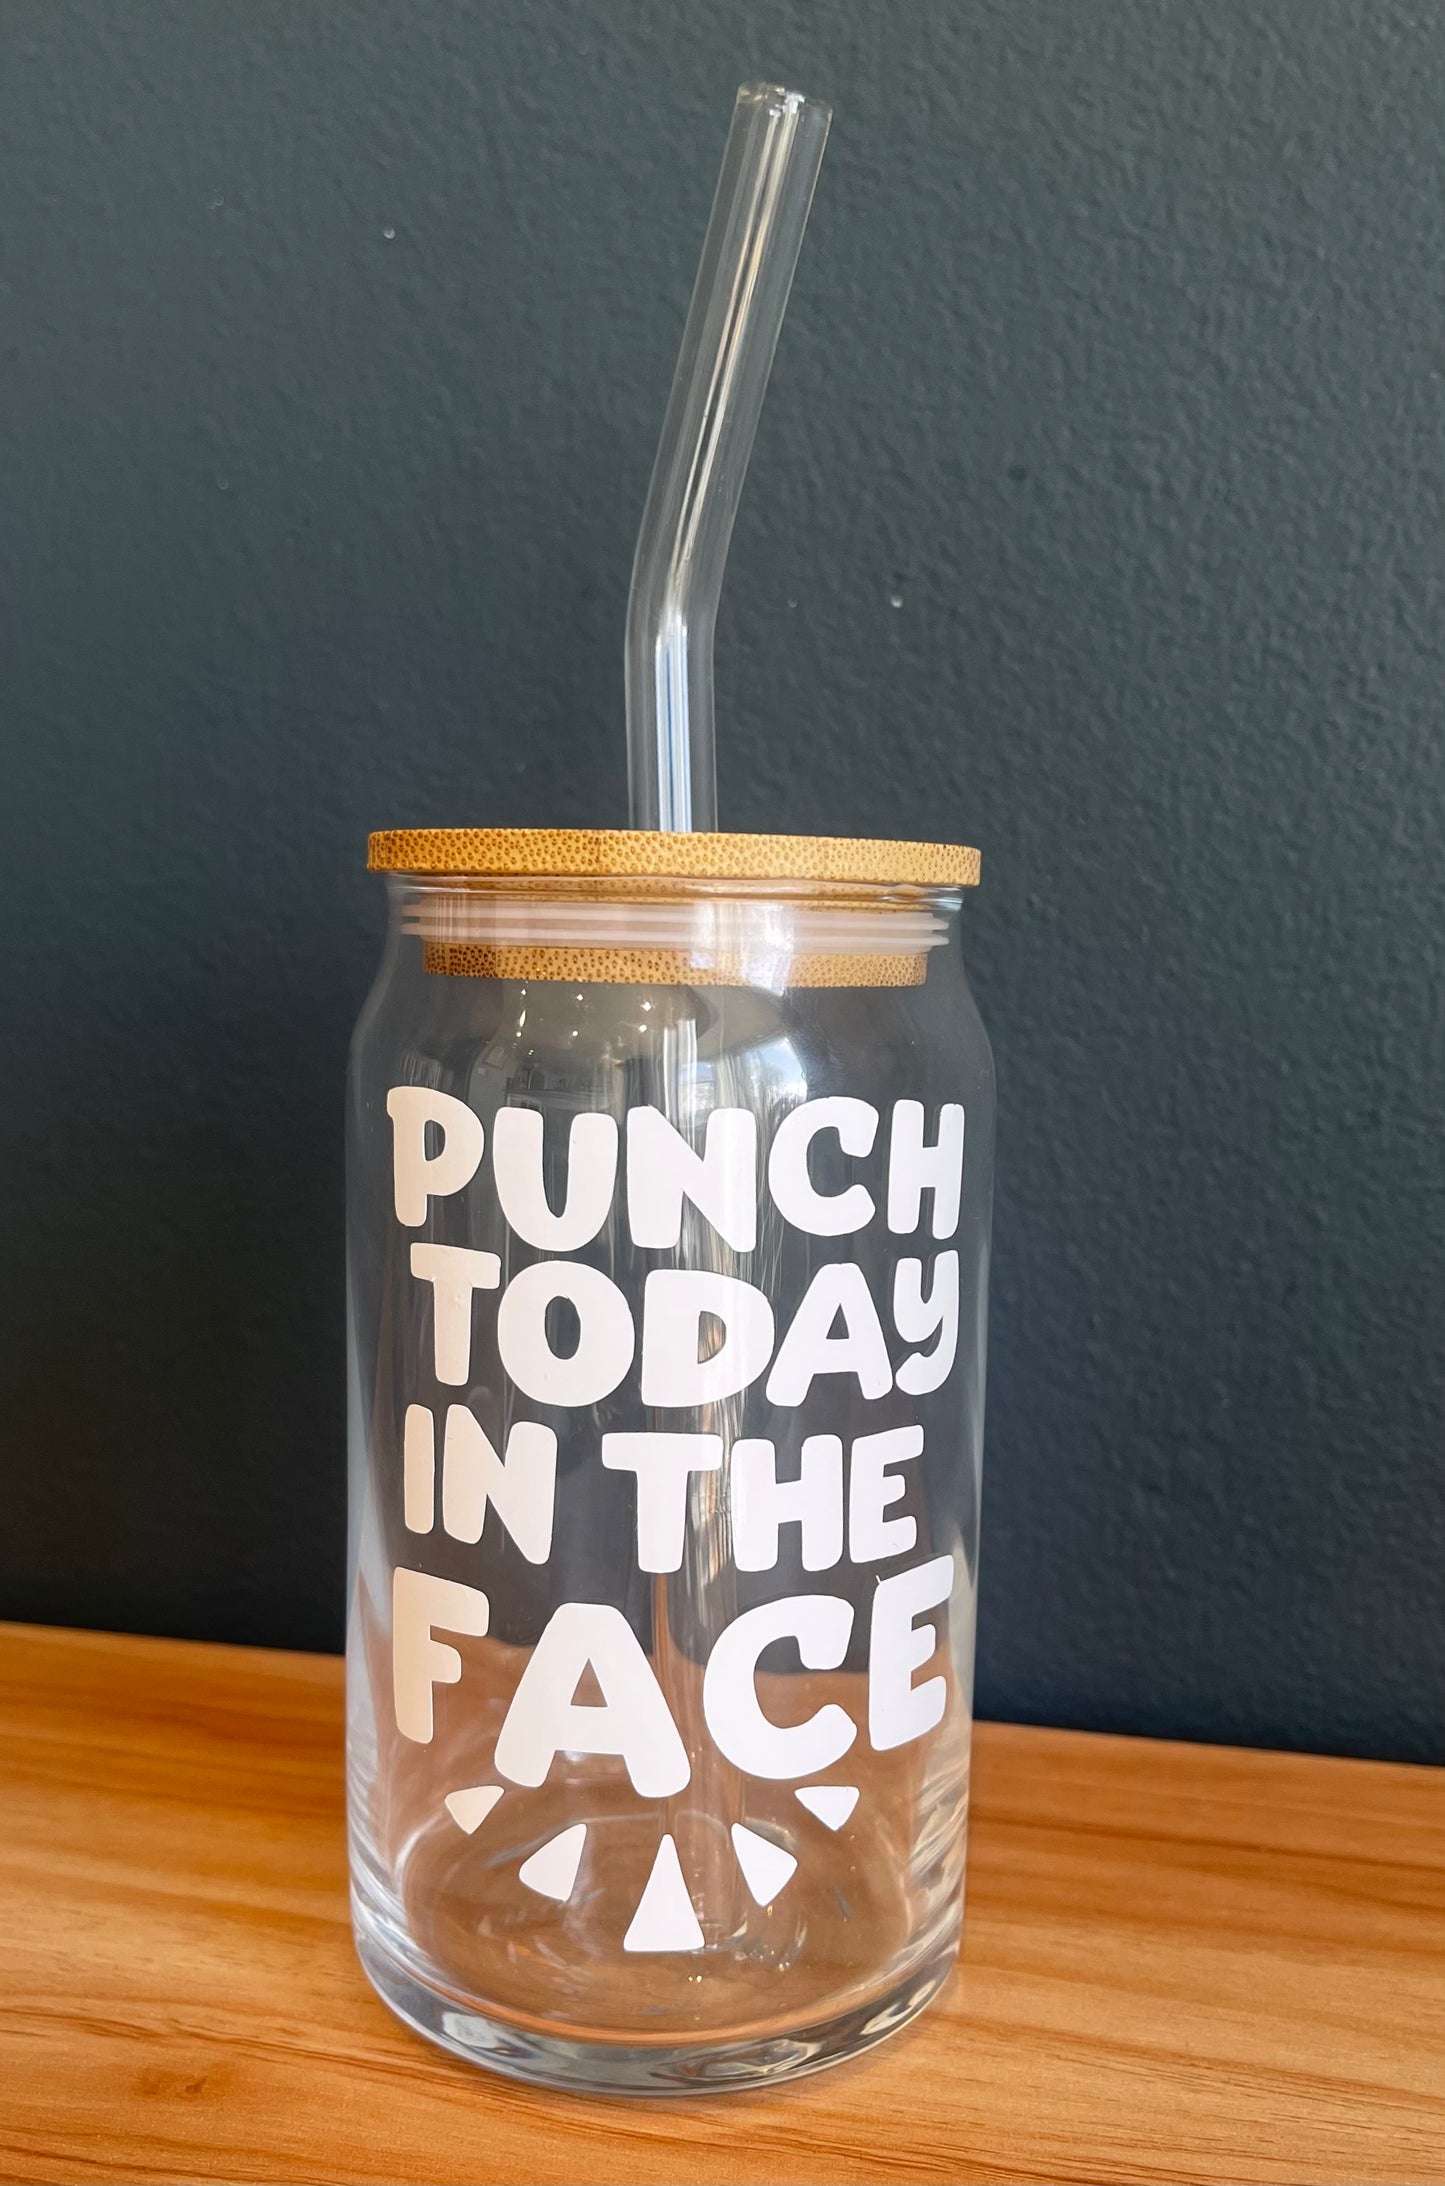 Punch today in the Face Glass